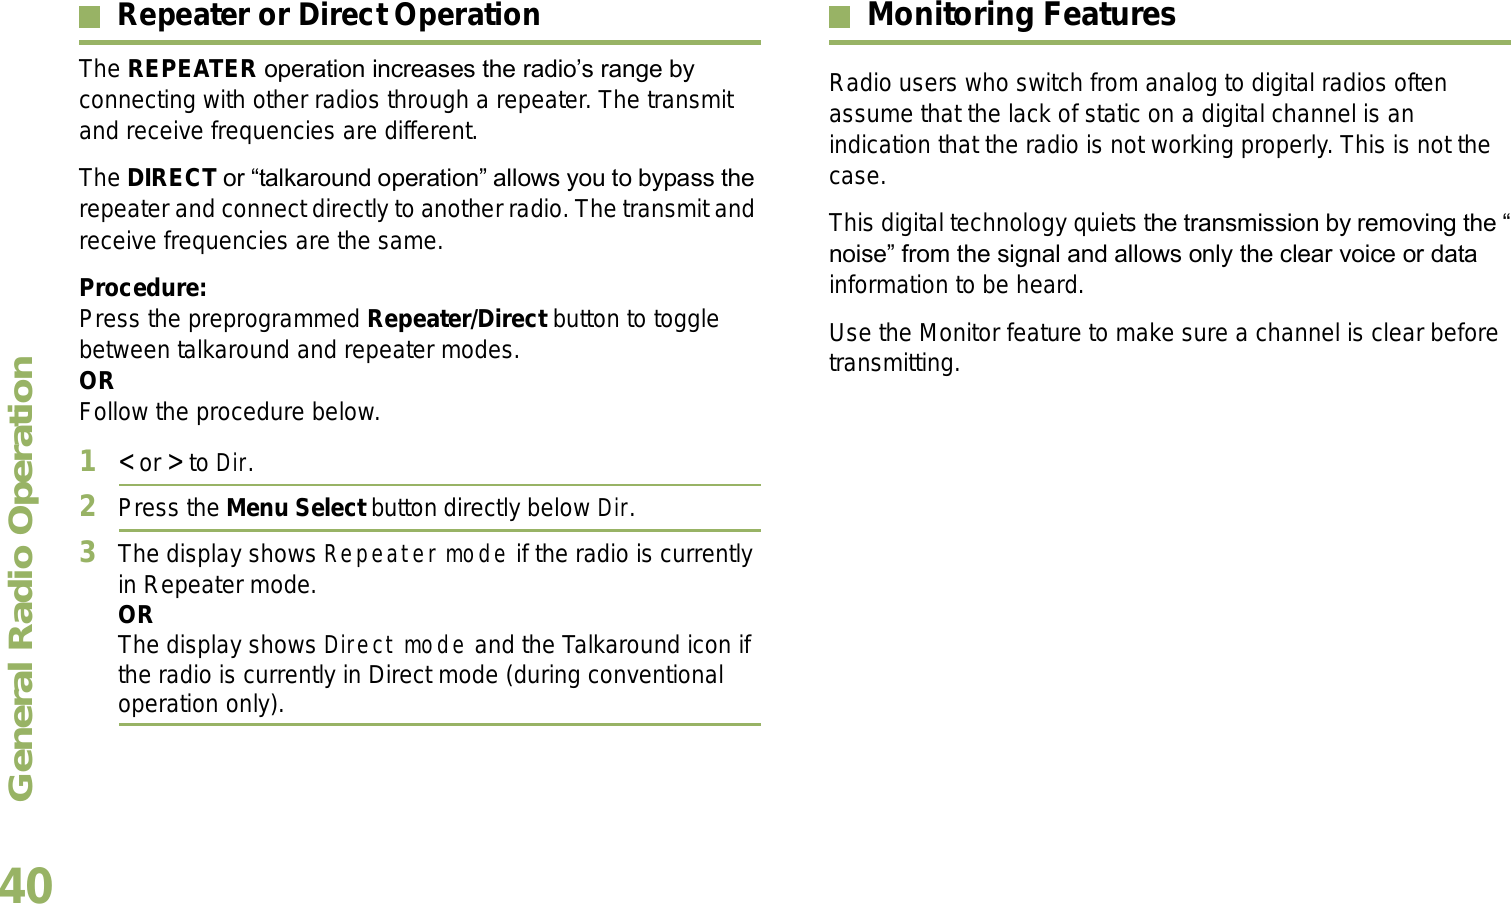 General Radio OperationEnglish40Repeater or Direct OperationThe REPEATER operation increases the radios range by connecting with other radios through a repeater. The transmit and receive frequencies are different.The DIRECT or talkaround operation allows you to bypass the repeater and connect directly to another radio. The transmit and receive frequencies are the same.Procedure:Press the preprogrammed Repeater/Direct button to toggle between talkaround and repeater modes.ORFollow the procedure below.1&lt; or &gt; to Dir.2Press the Menu Select button directly below Dir.3The display shows Repeater mode if the radio is currently in Repeater mode. ORThe display shows Direct mode and the Talkaround icon if the radio is currently in Direct mode (during conventional operation only).Monitoring FeaturesRadio users who switch from analog to digital radios often assume that the lack of static on a digital channel is an indication that the radio is not working properly. This is not the case. This digital technology quiets the transmission by removing the noise from the signal and allows only the clear voice or data information to be heard.Use the Monitor feature to make sure a channel is clear before transmitting.